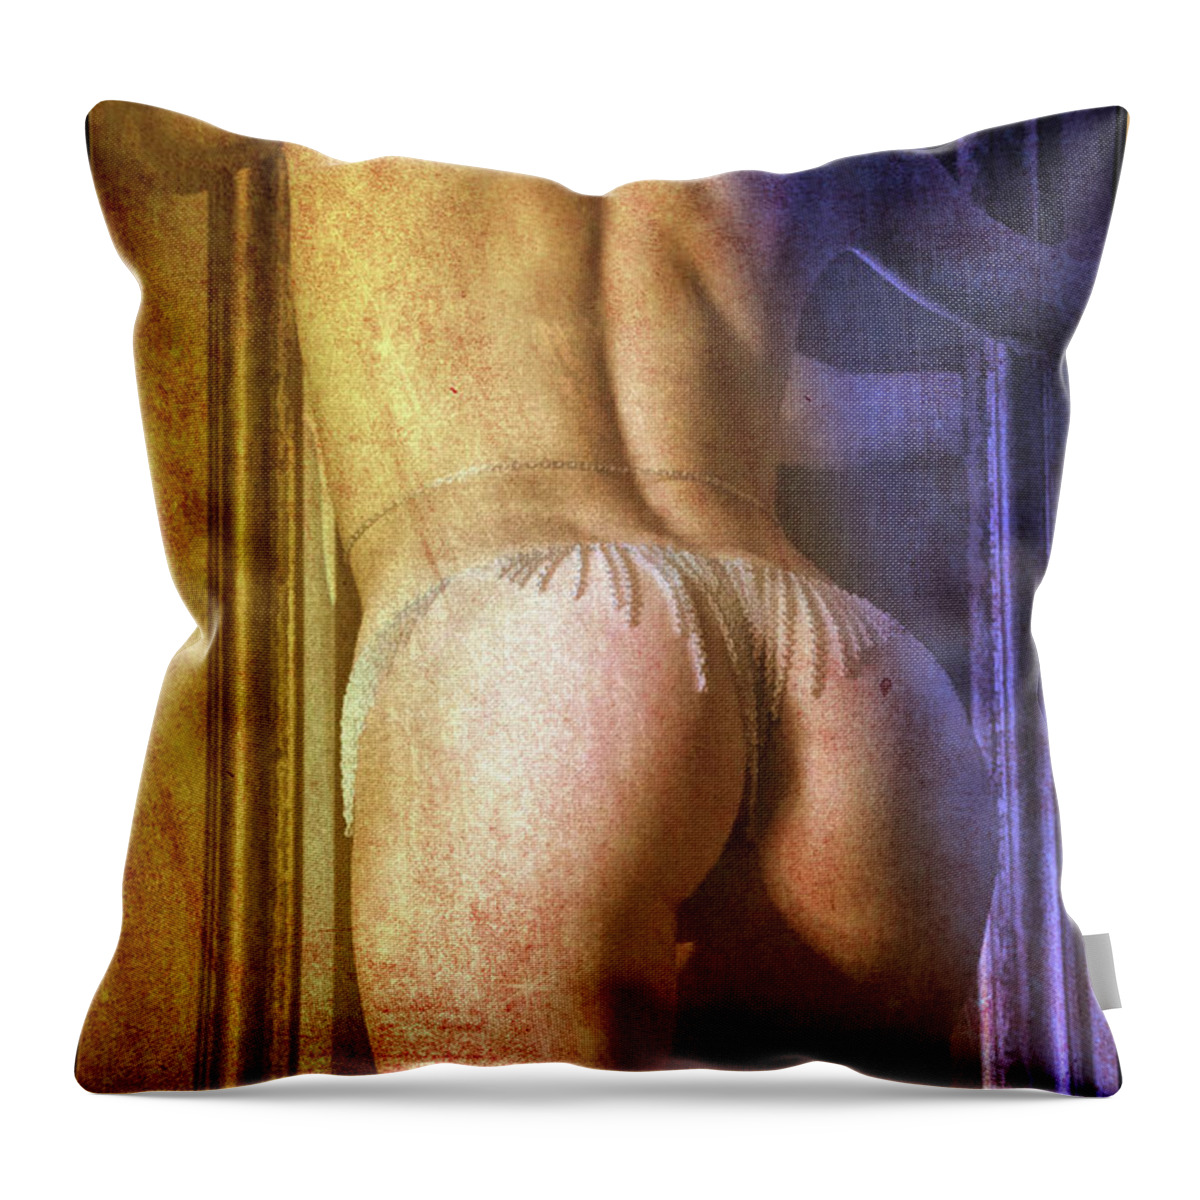 Dark Throw Pillow featuring the digital art Shrouded In Shadows II by Recreating Creation